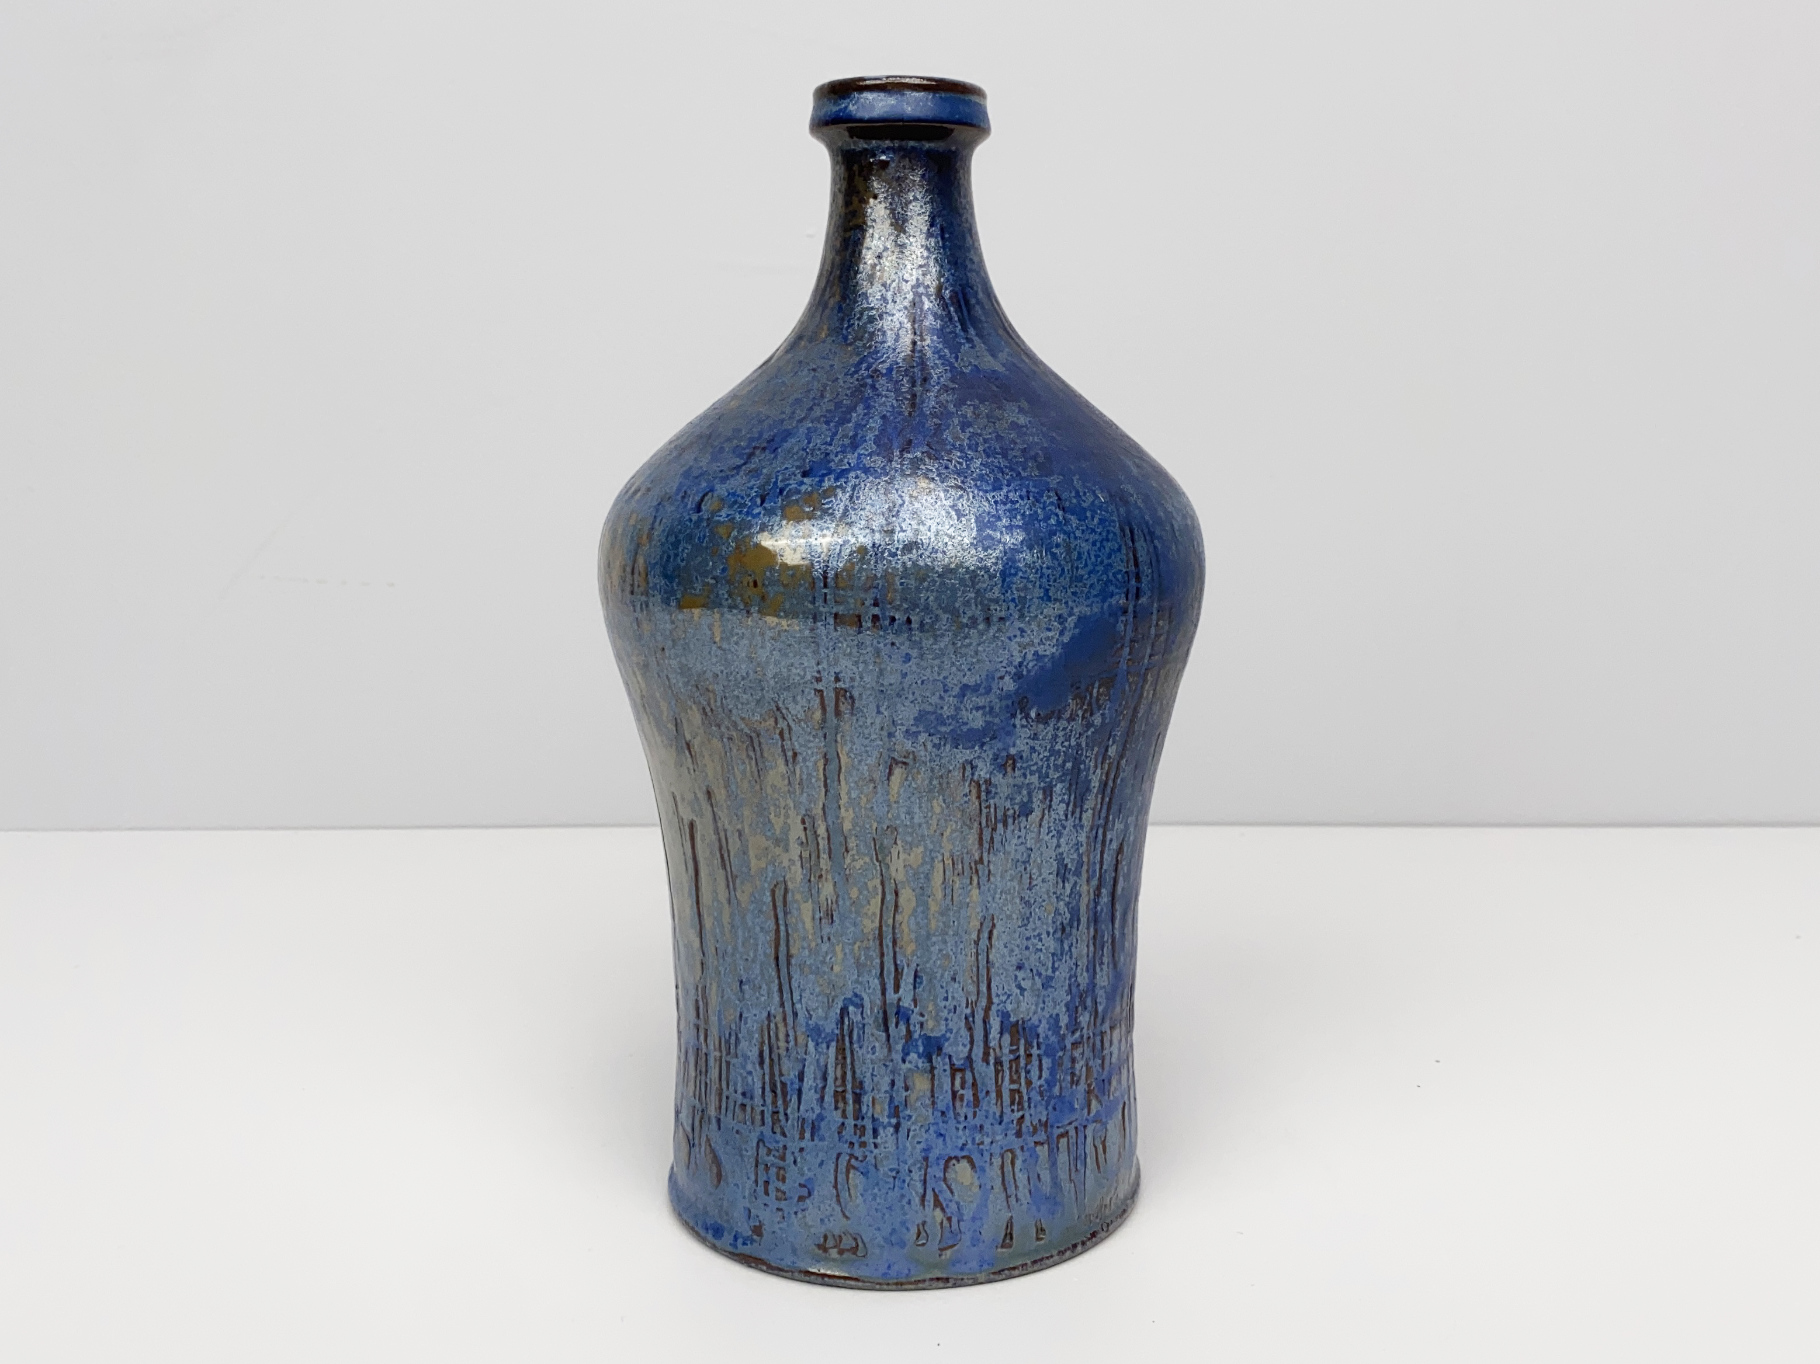 Vase, Ceramic, Earthenware, Unique Piece, blue Glaze with incised Pattern, by Wilhelm & Elly Kuch, 1970s